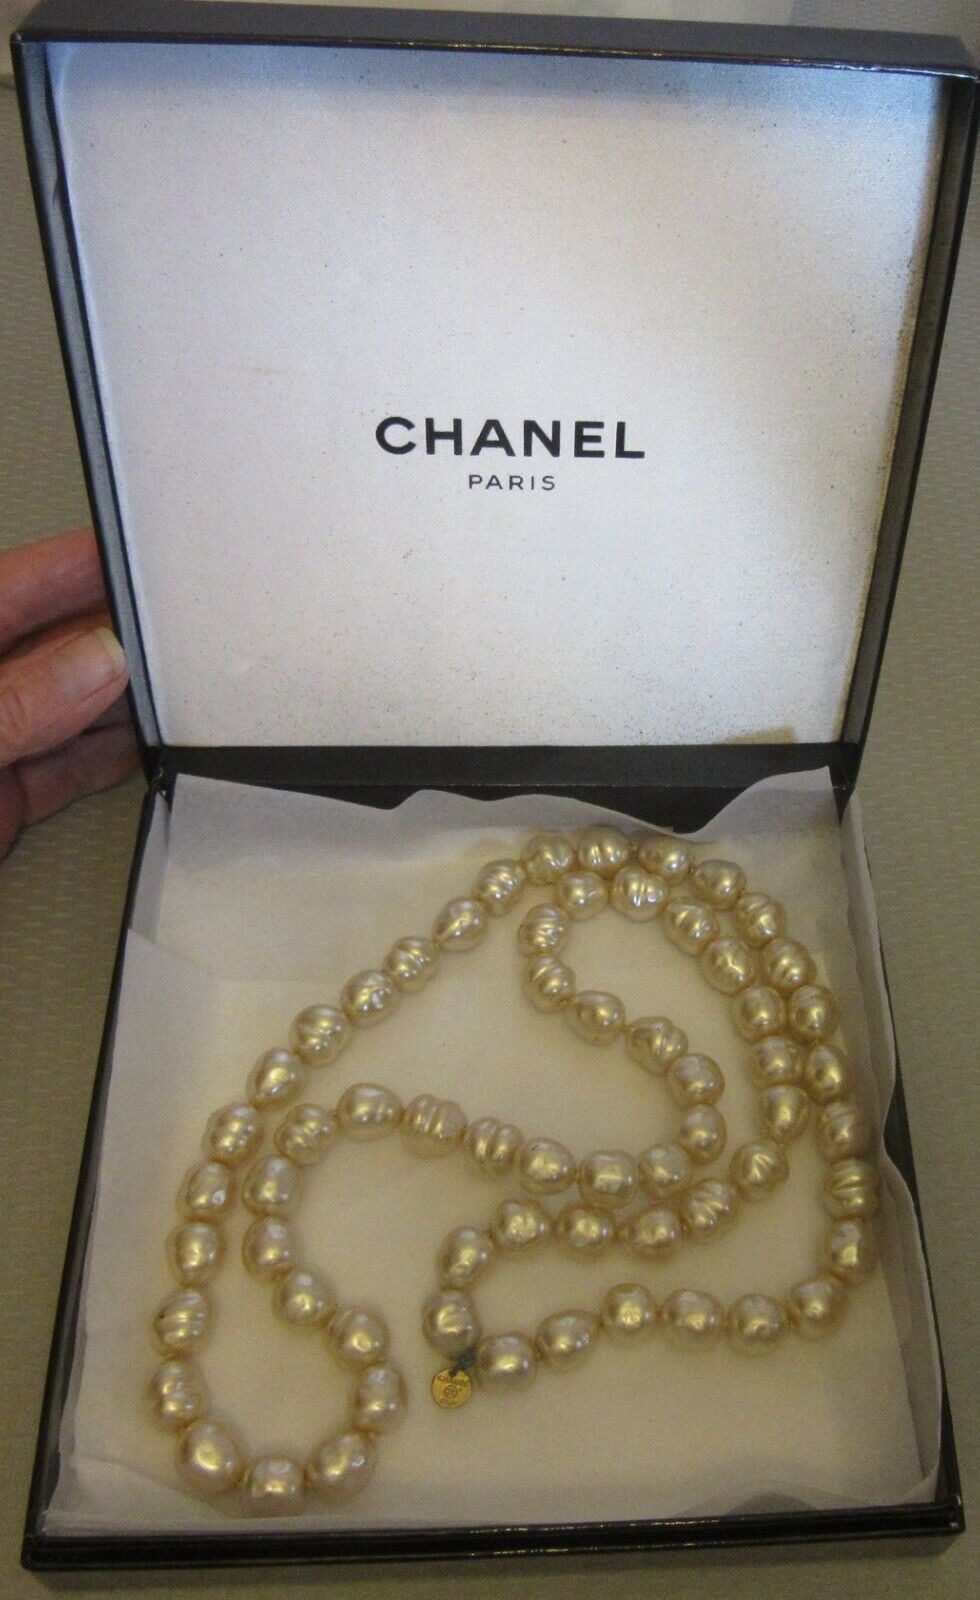 CHANEL GRIPOIX PEARL NECKLACE 1981 vintage 35 long chunky baroque 15mm  with box